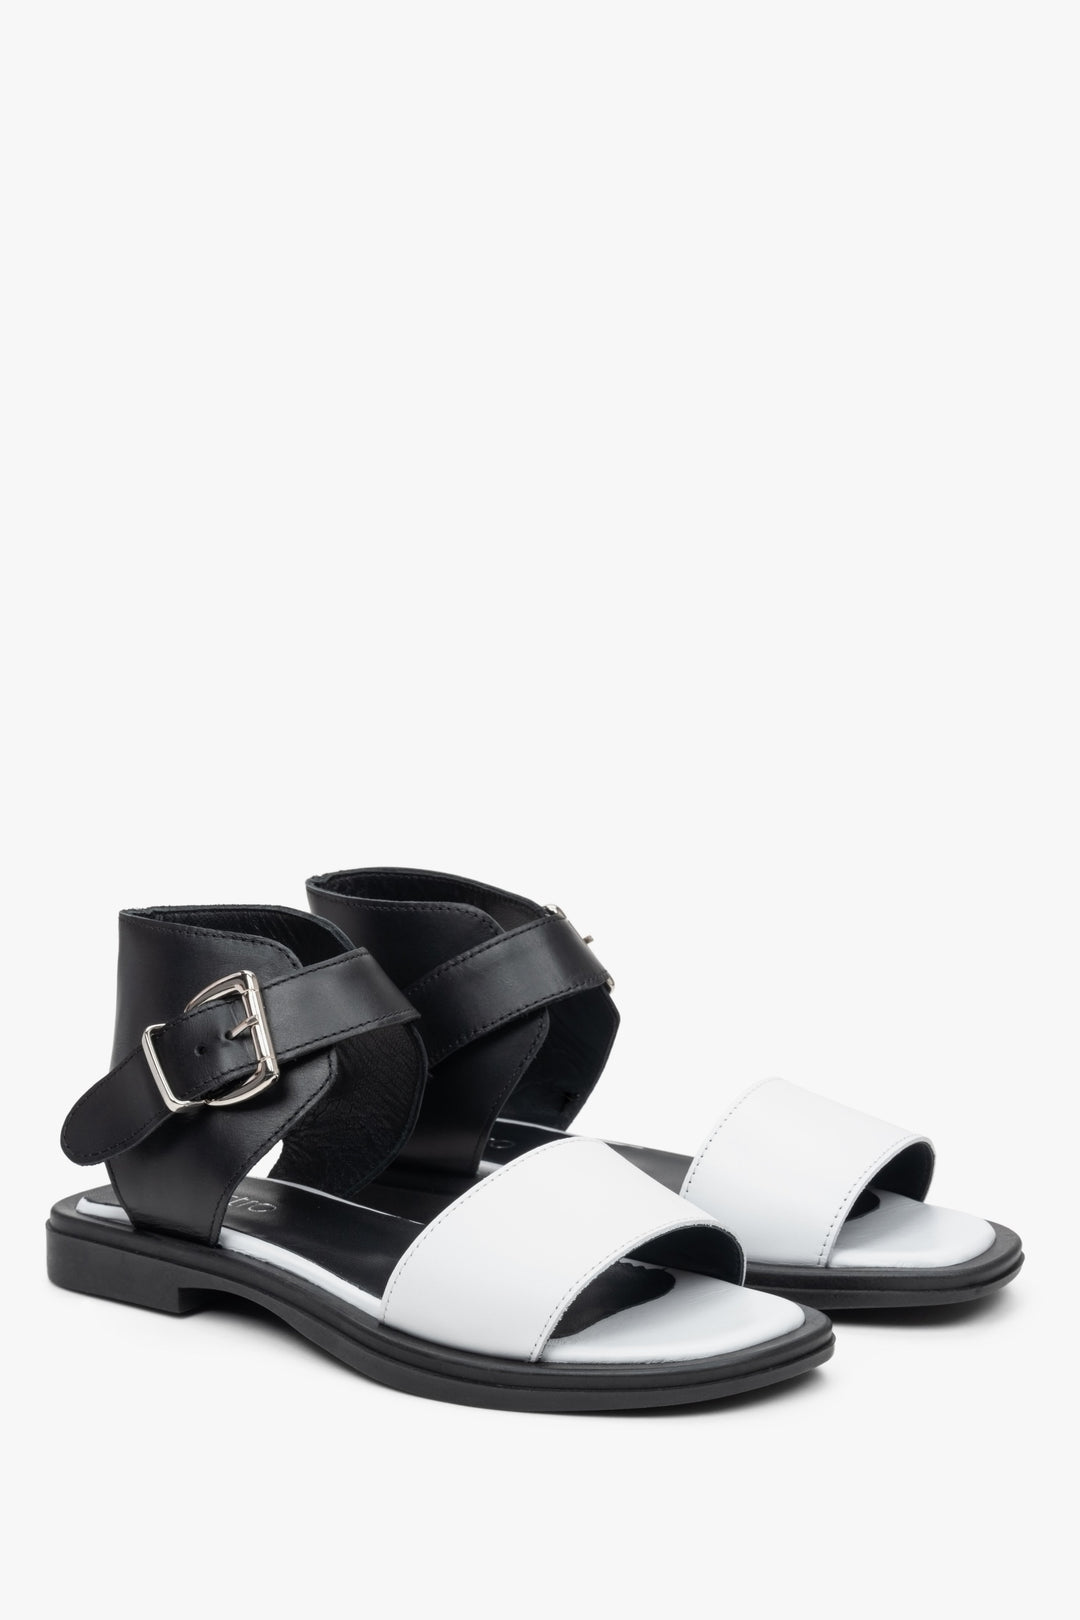 Black and white women's flat sandals made of natural leather Estro.